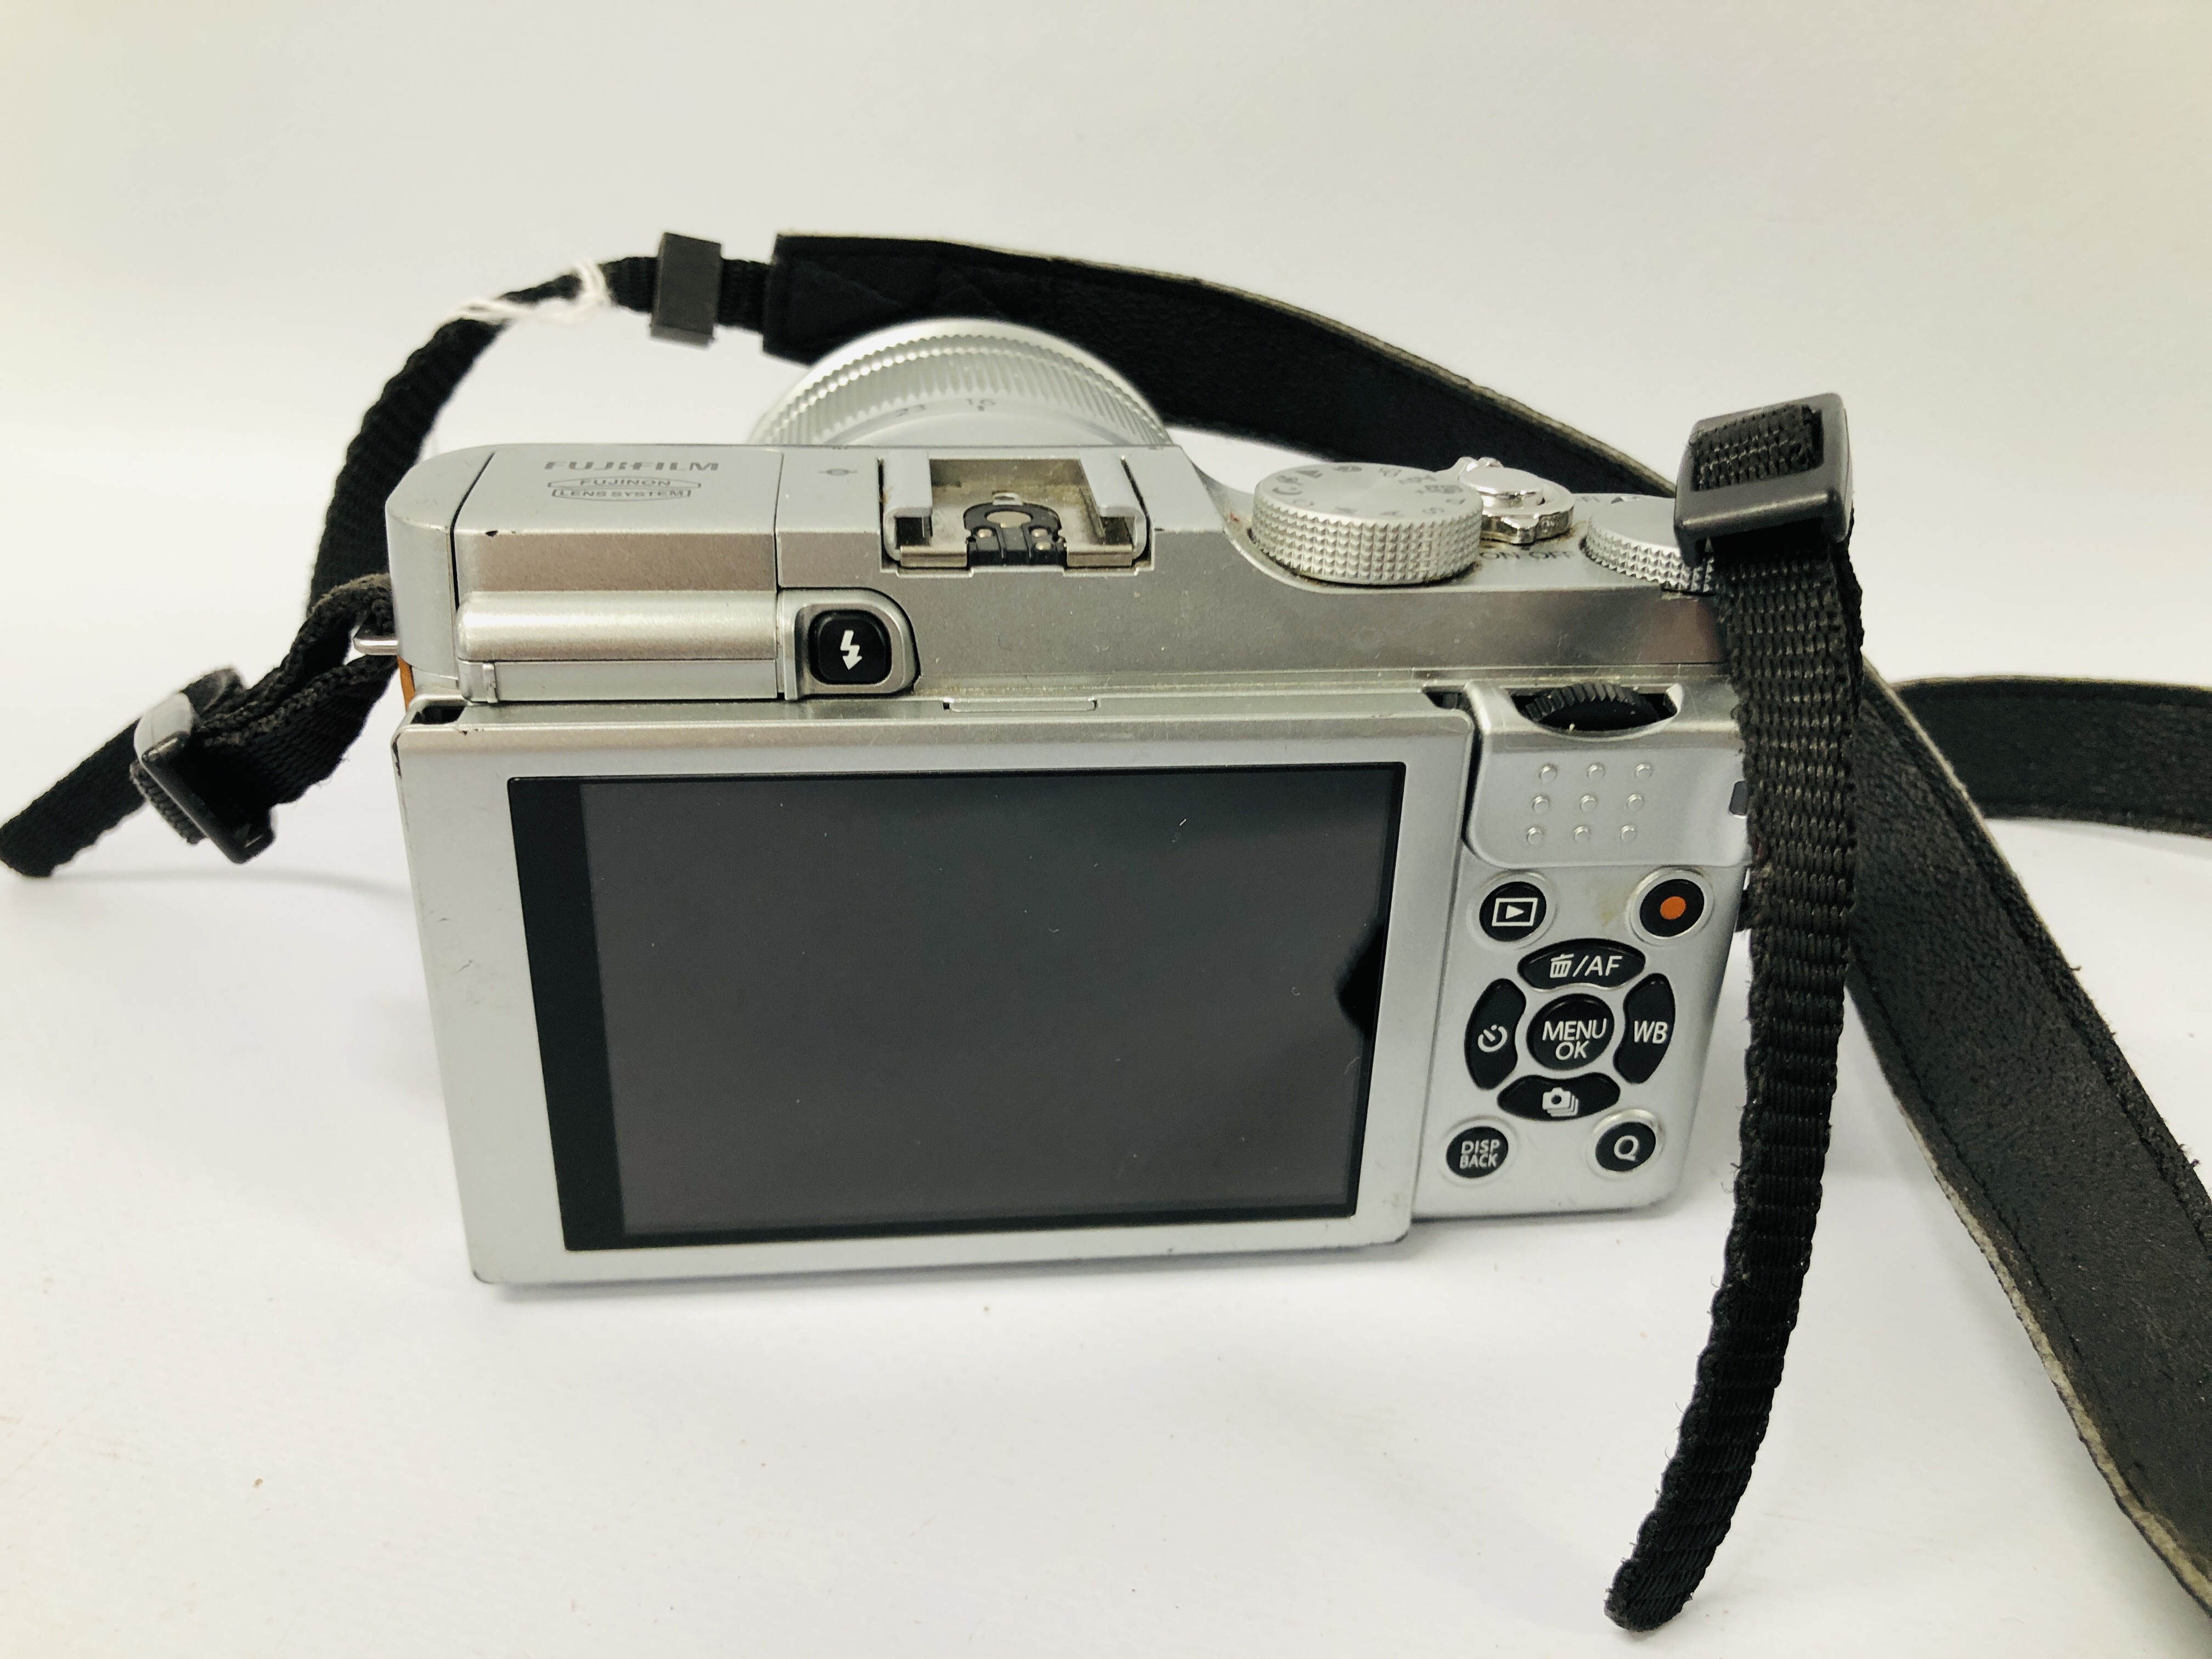 FUJIFILM X-A2 DIGITAL CAMERA FITTED WITH FUJIFILM XC 16-50 MM LENS (NO BATTERY) S/N 55L04338 - SOLD - Image 4 of 5